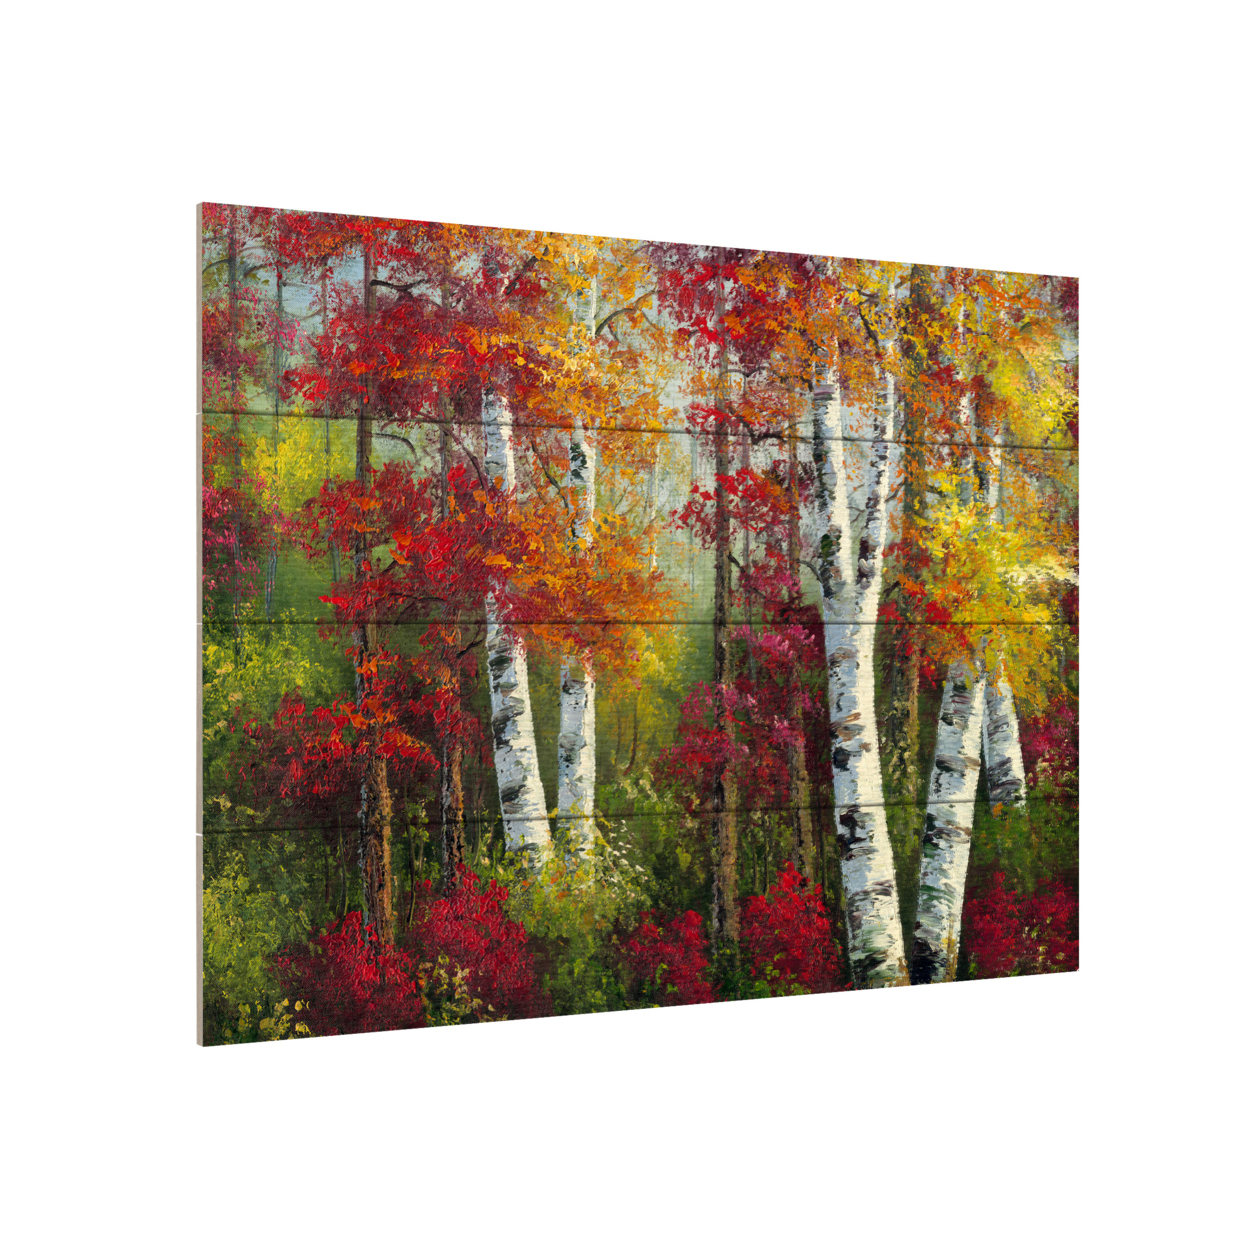 Wall Art 12 X 16 Inches Titled Indian Summer Ready To Hang Printed On Wooden Planks